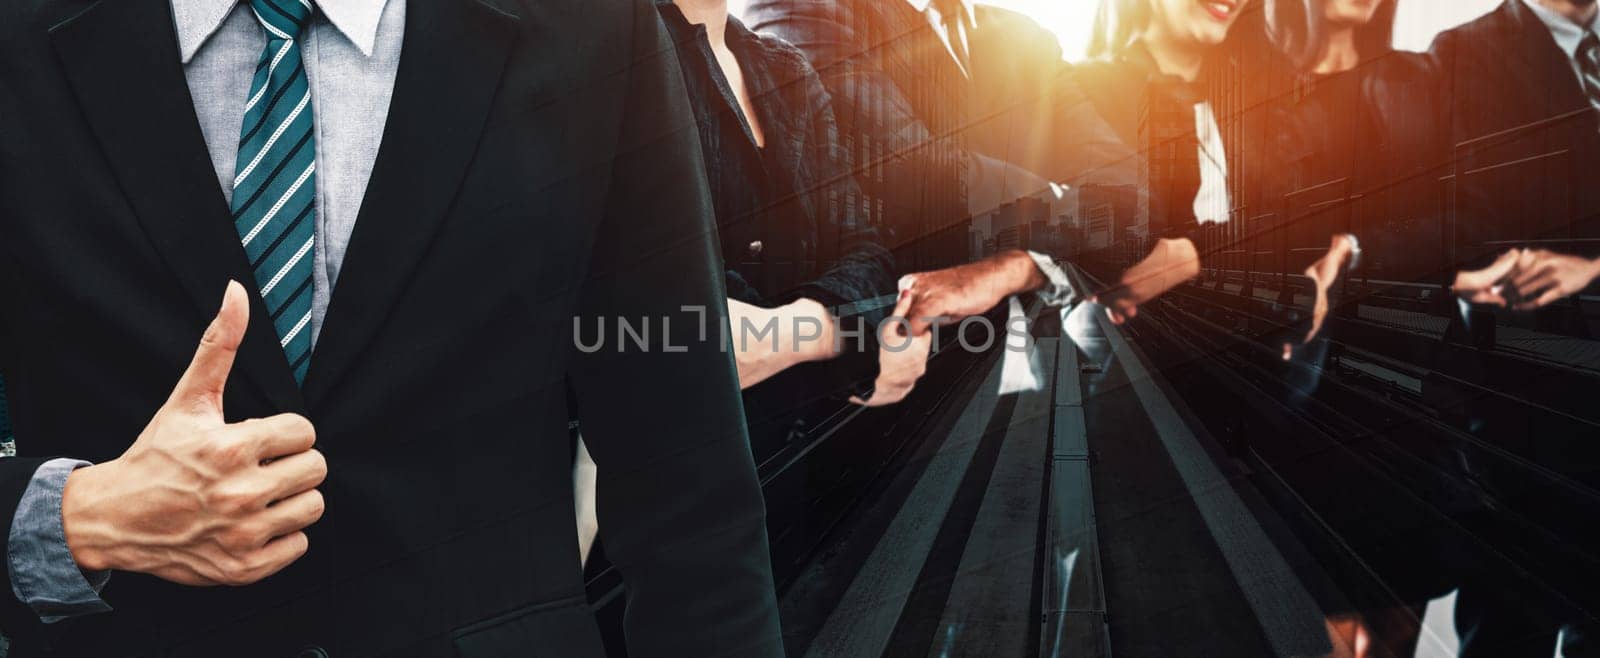 Business people group standing together with city office building background double exposure. Modern corporate job and human resources recruiting concept. uds